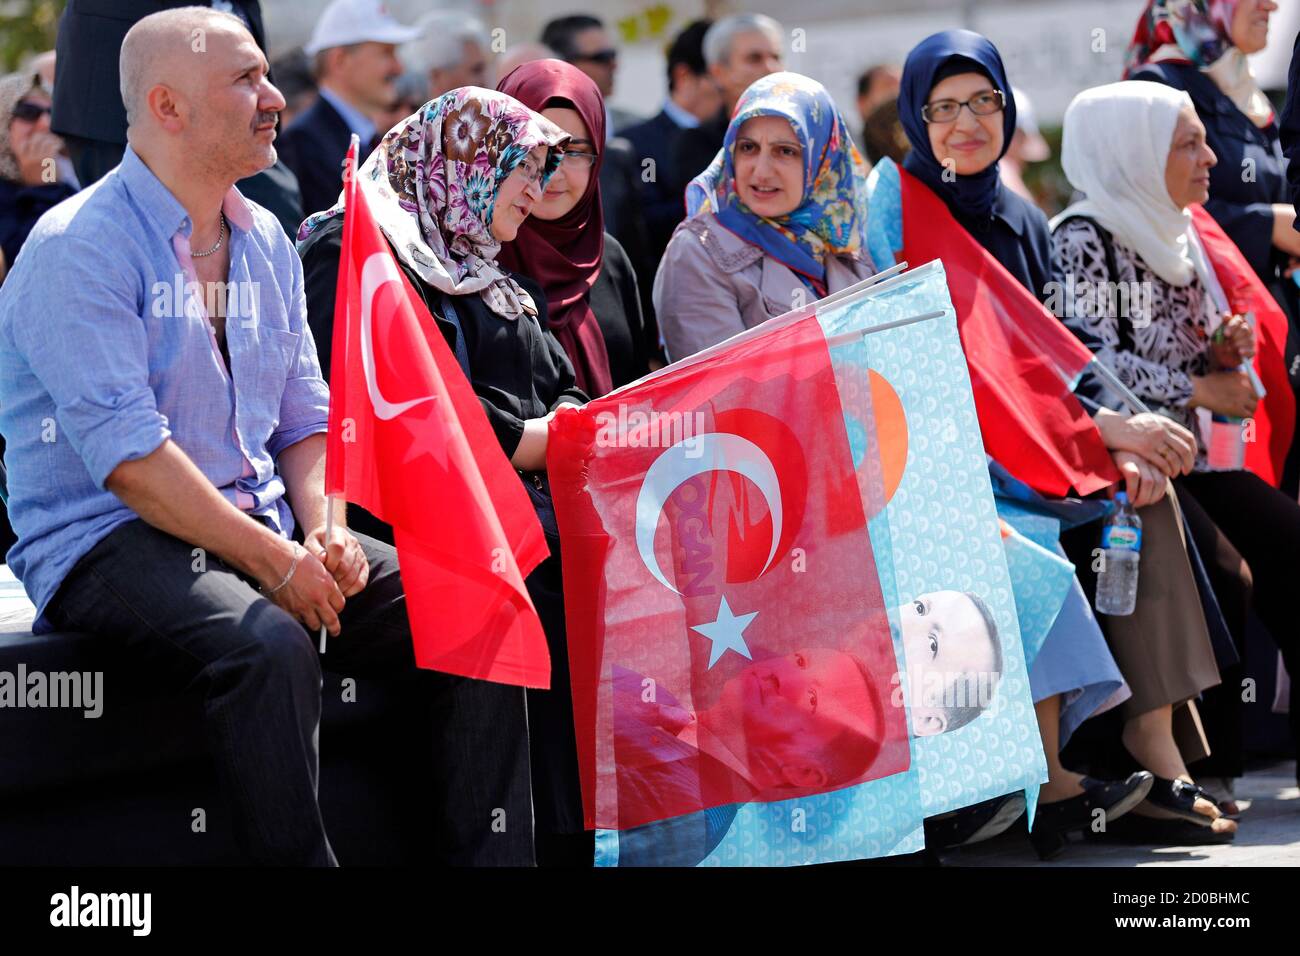 Supporters attend a gathering in support of Turkey's Prime Minister and presidential candidate Tayyip Erdogan in Istanbul August 8, 2014. Erdogan is set to secure his place in history as Turkey's first popularly-elected president on Sunday, but his tightening grip on power has polarised the nation, worried Western allies and raised fears of creeping authoritarianism. REUTERS/Murad Sezer (TURKEY  - Tags: POLITICS ELECTIONS) Stock Photo